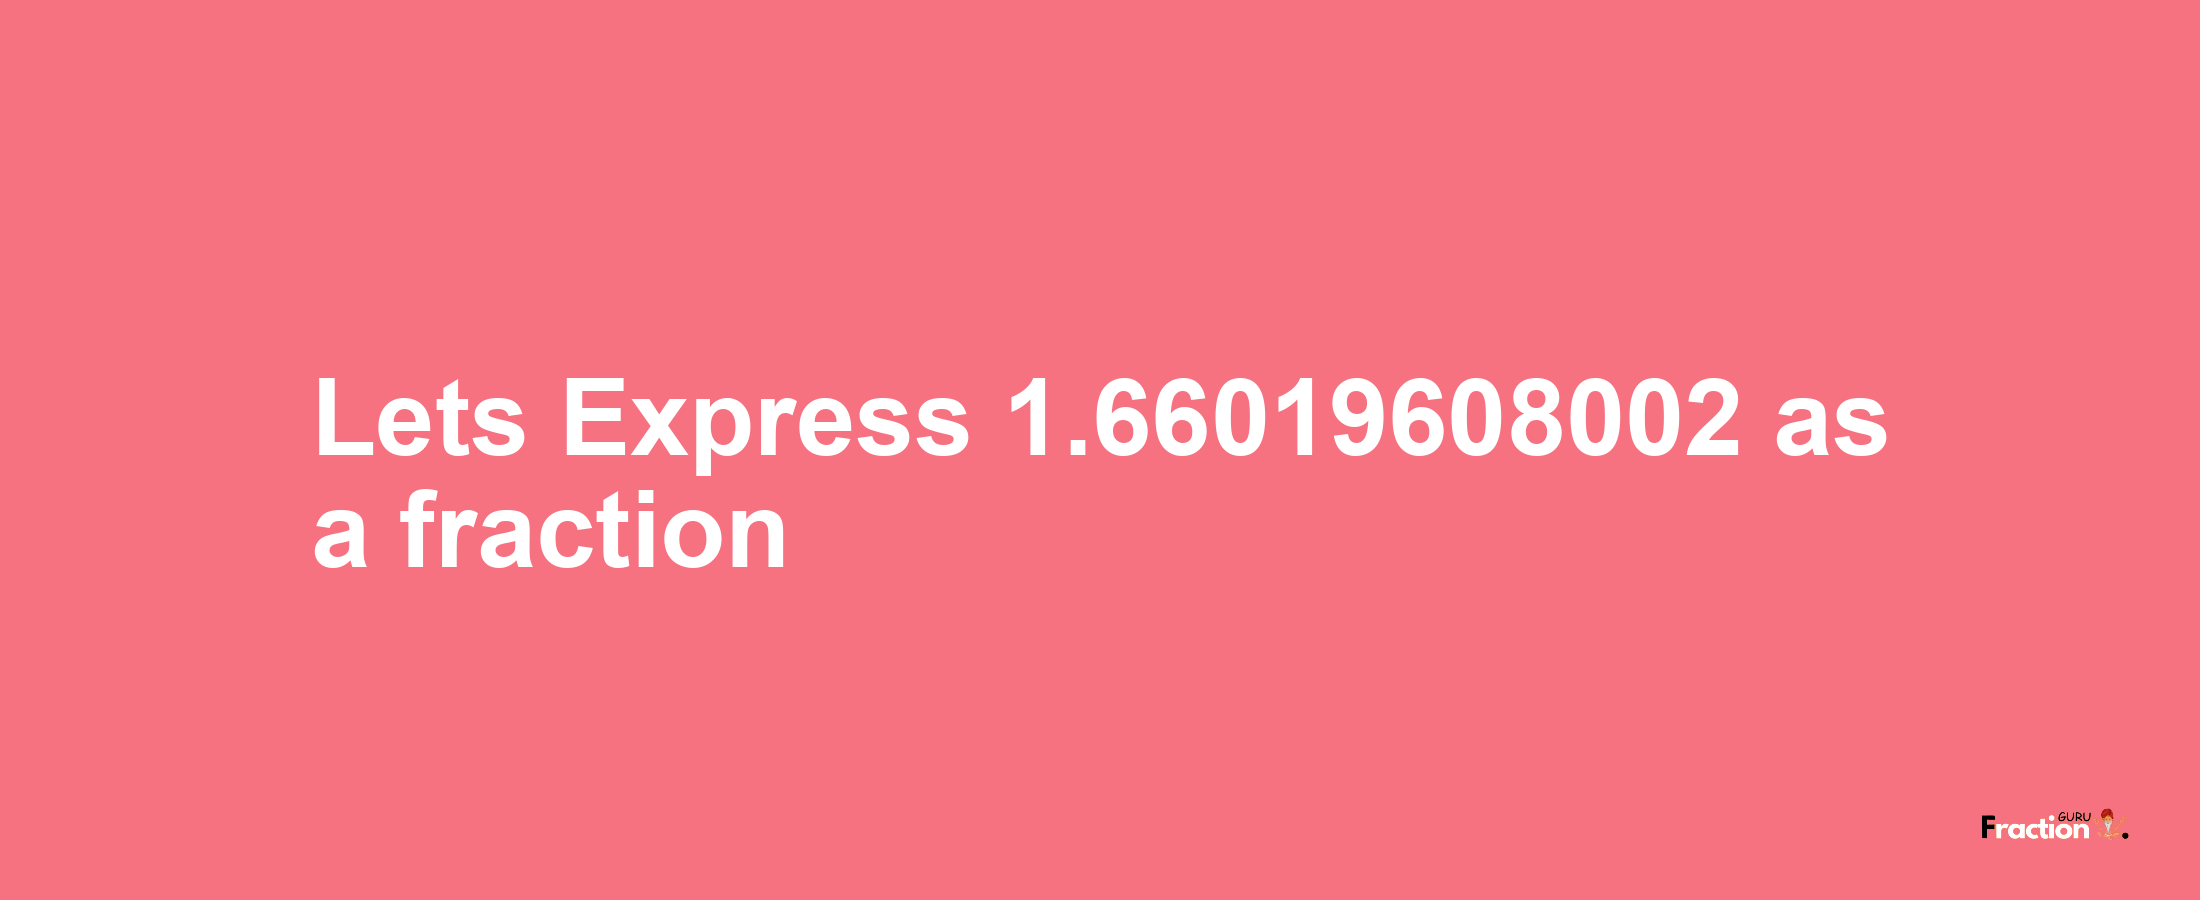 Lets Express 1.66019608002 as afraction